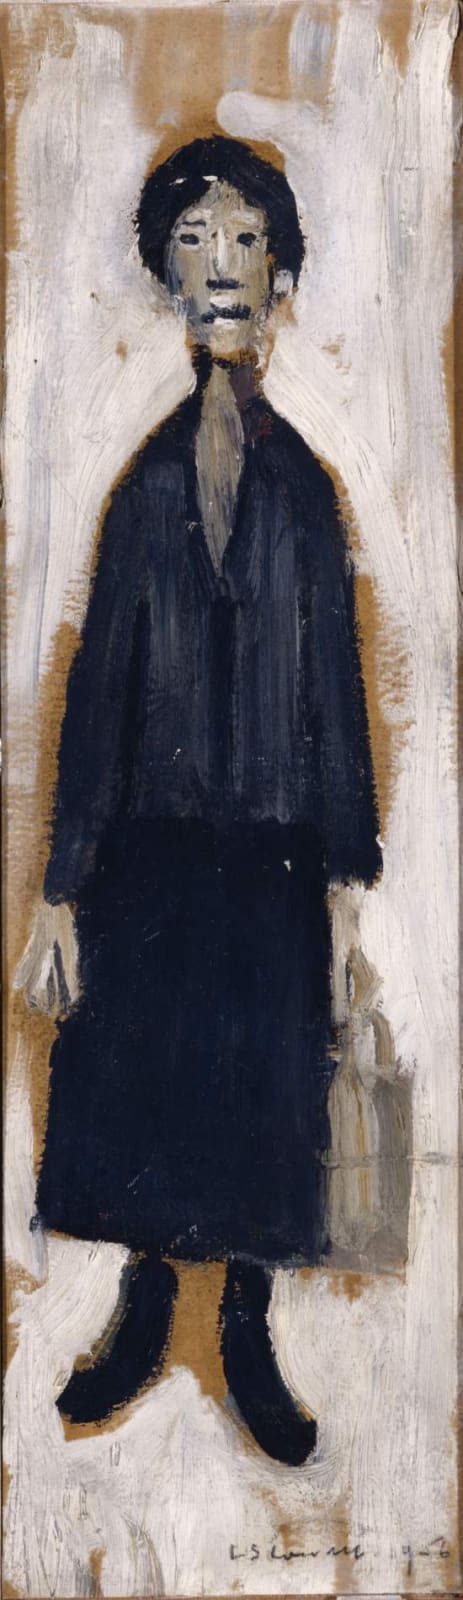 L.S. Lowry (1887-1976) Woman with a Shopping Bag 1956 Oil on board 40 x 12.1 cm Royal Academy of Arts, London To see and discover more about this artist click here